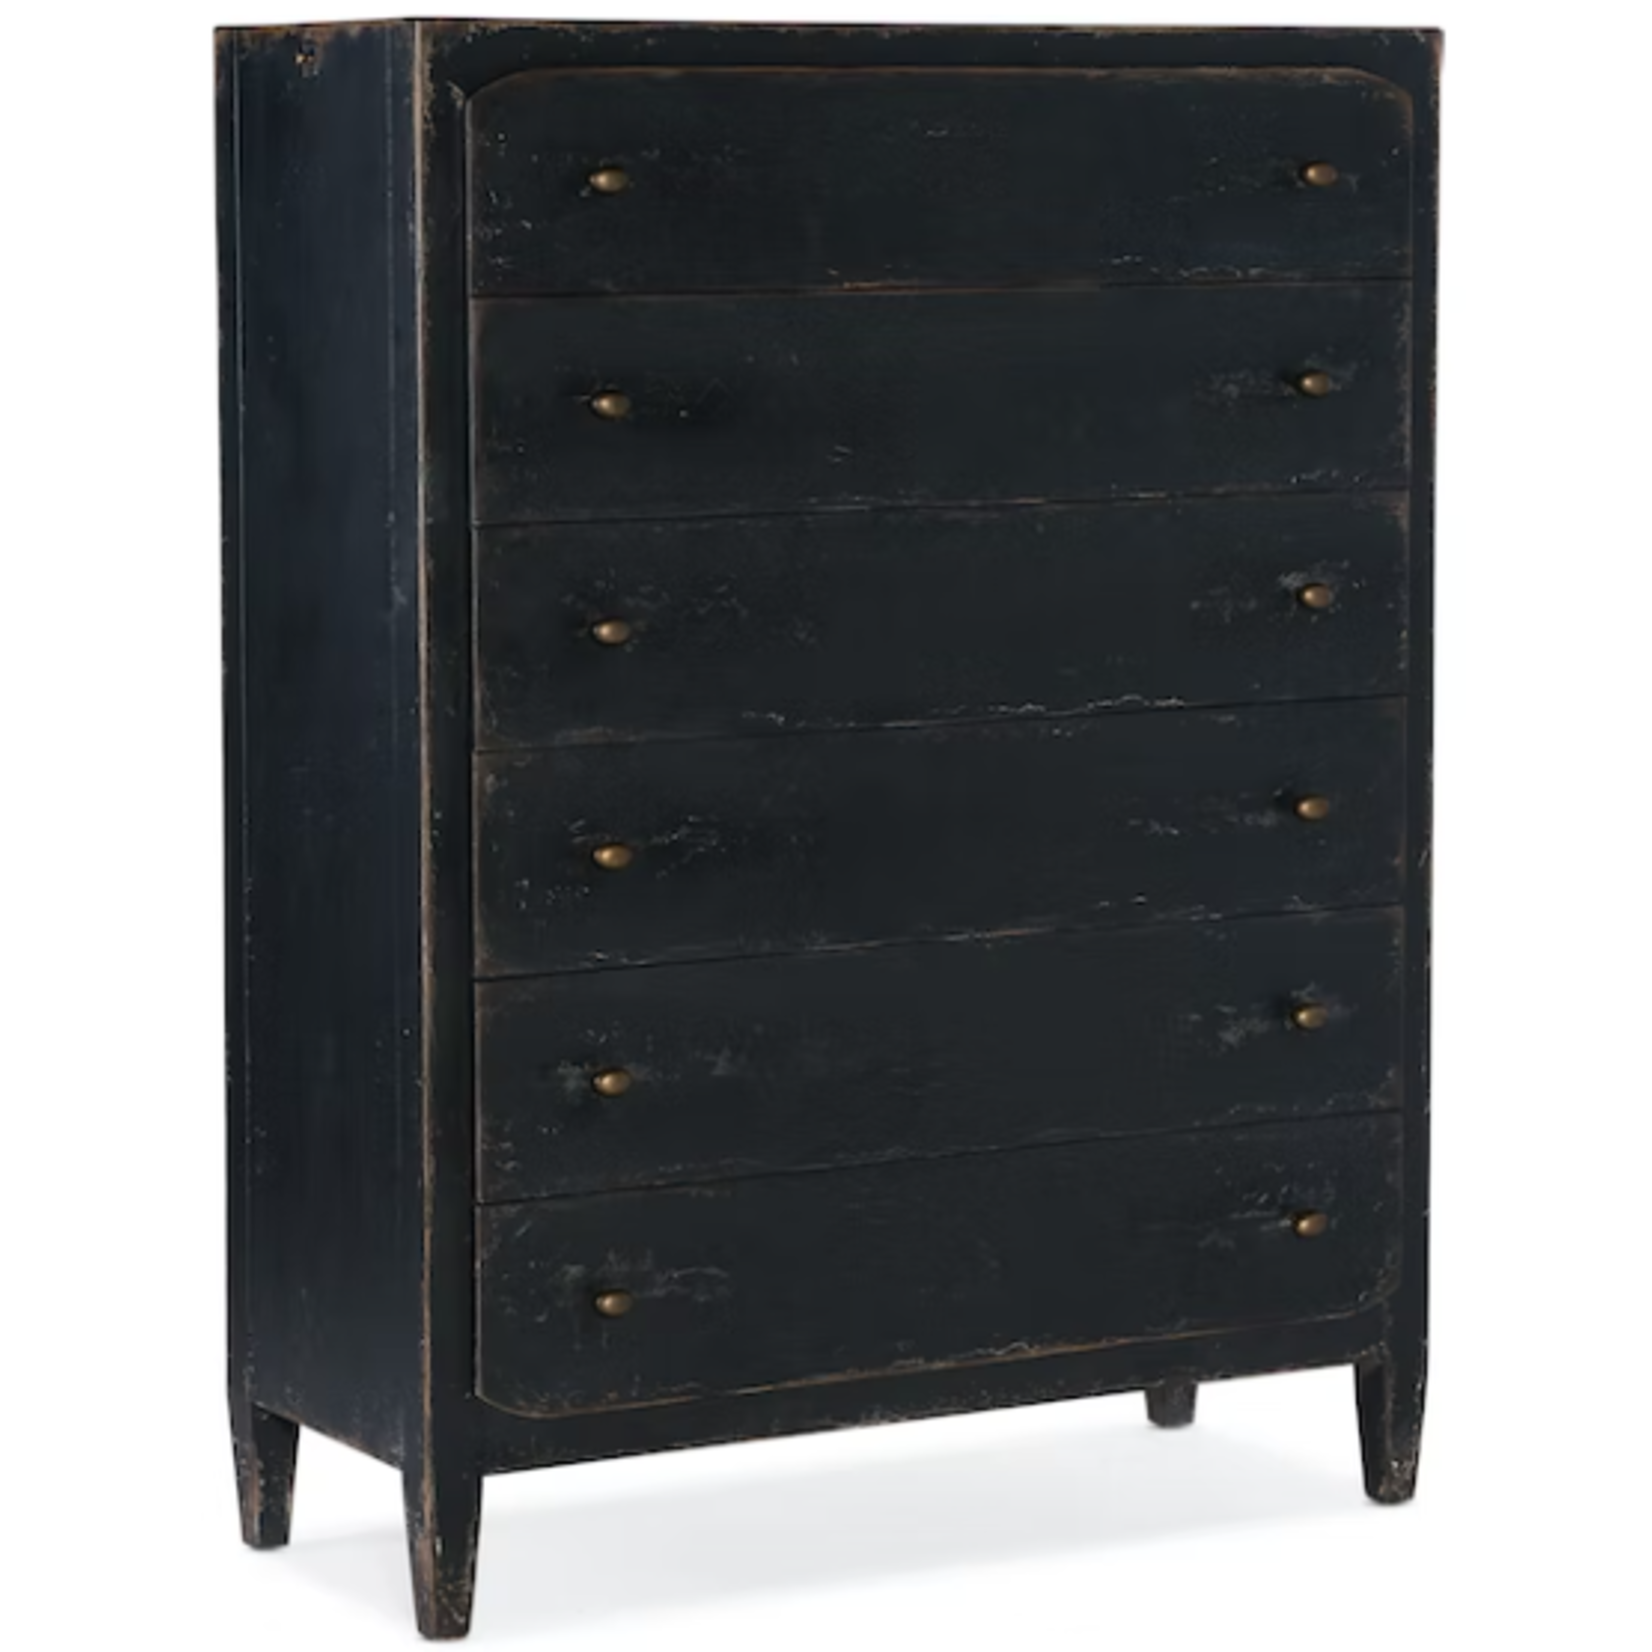 HOOKER FURNITURE CIAO BELLA SIX DRAWER BLACK CHEST